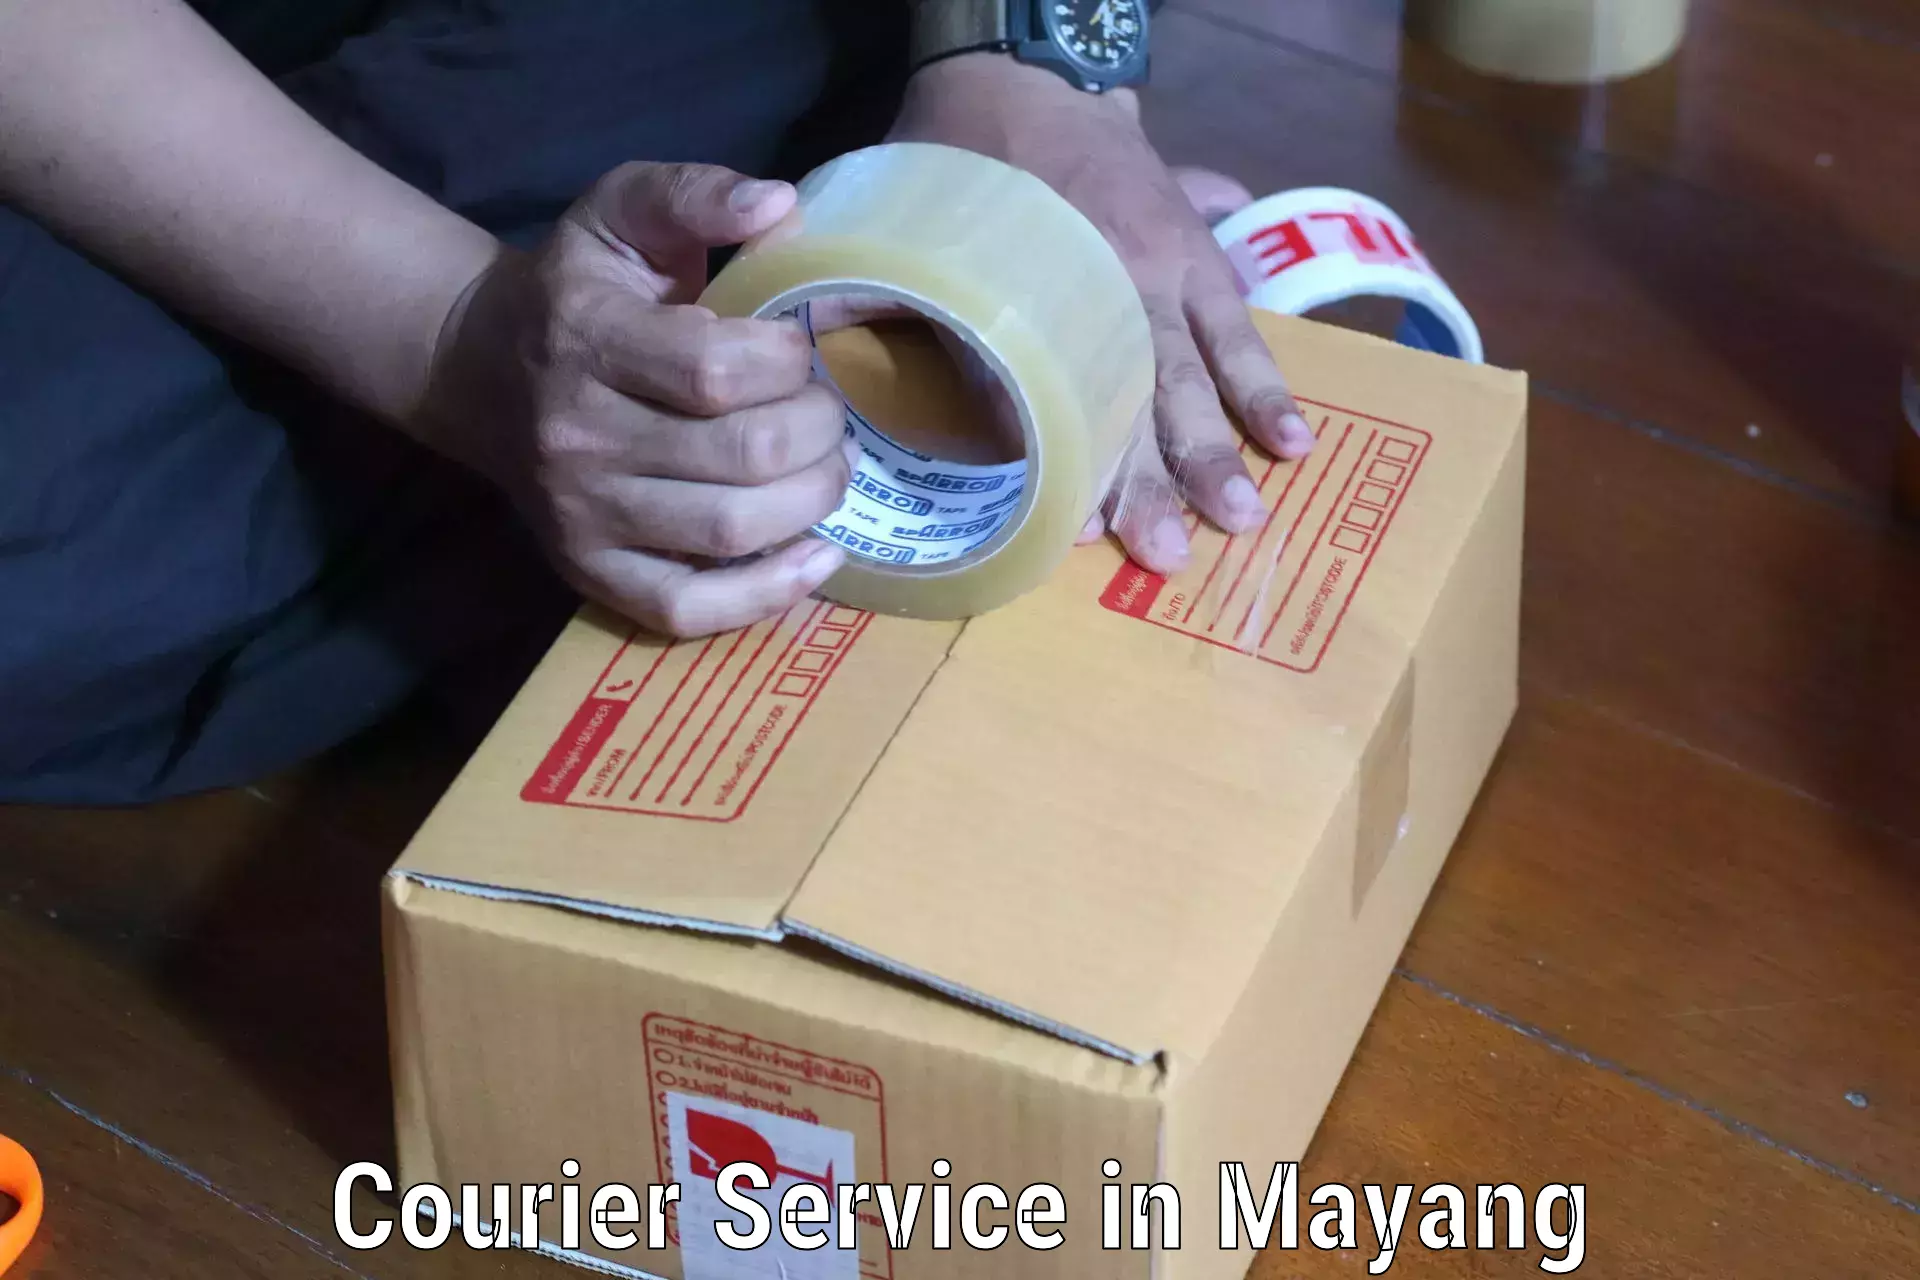 Tracking updates in Mayang